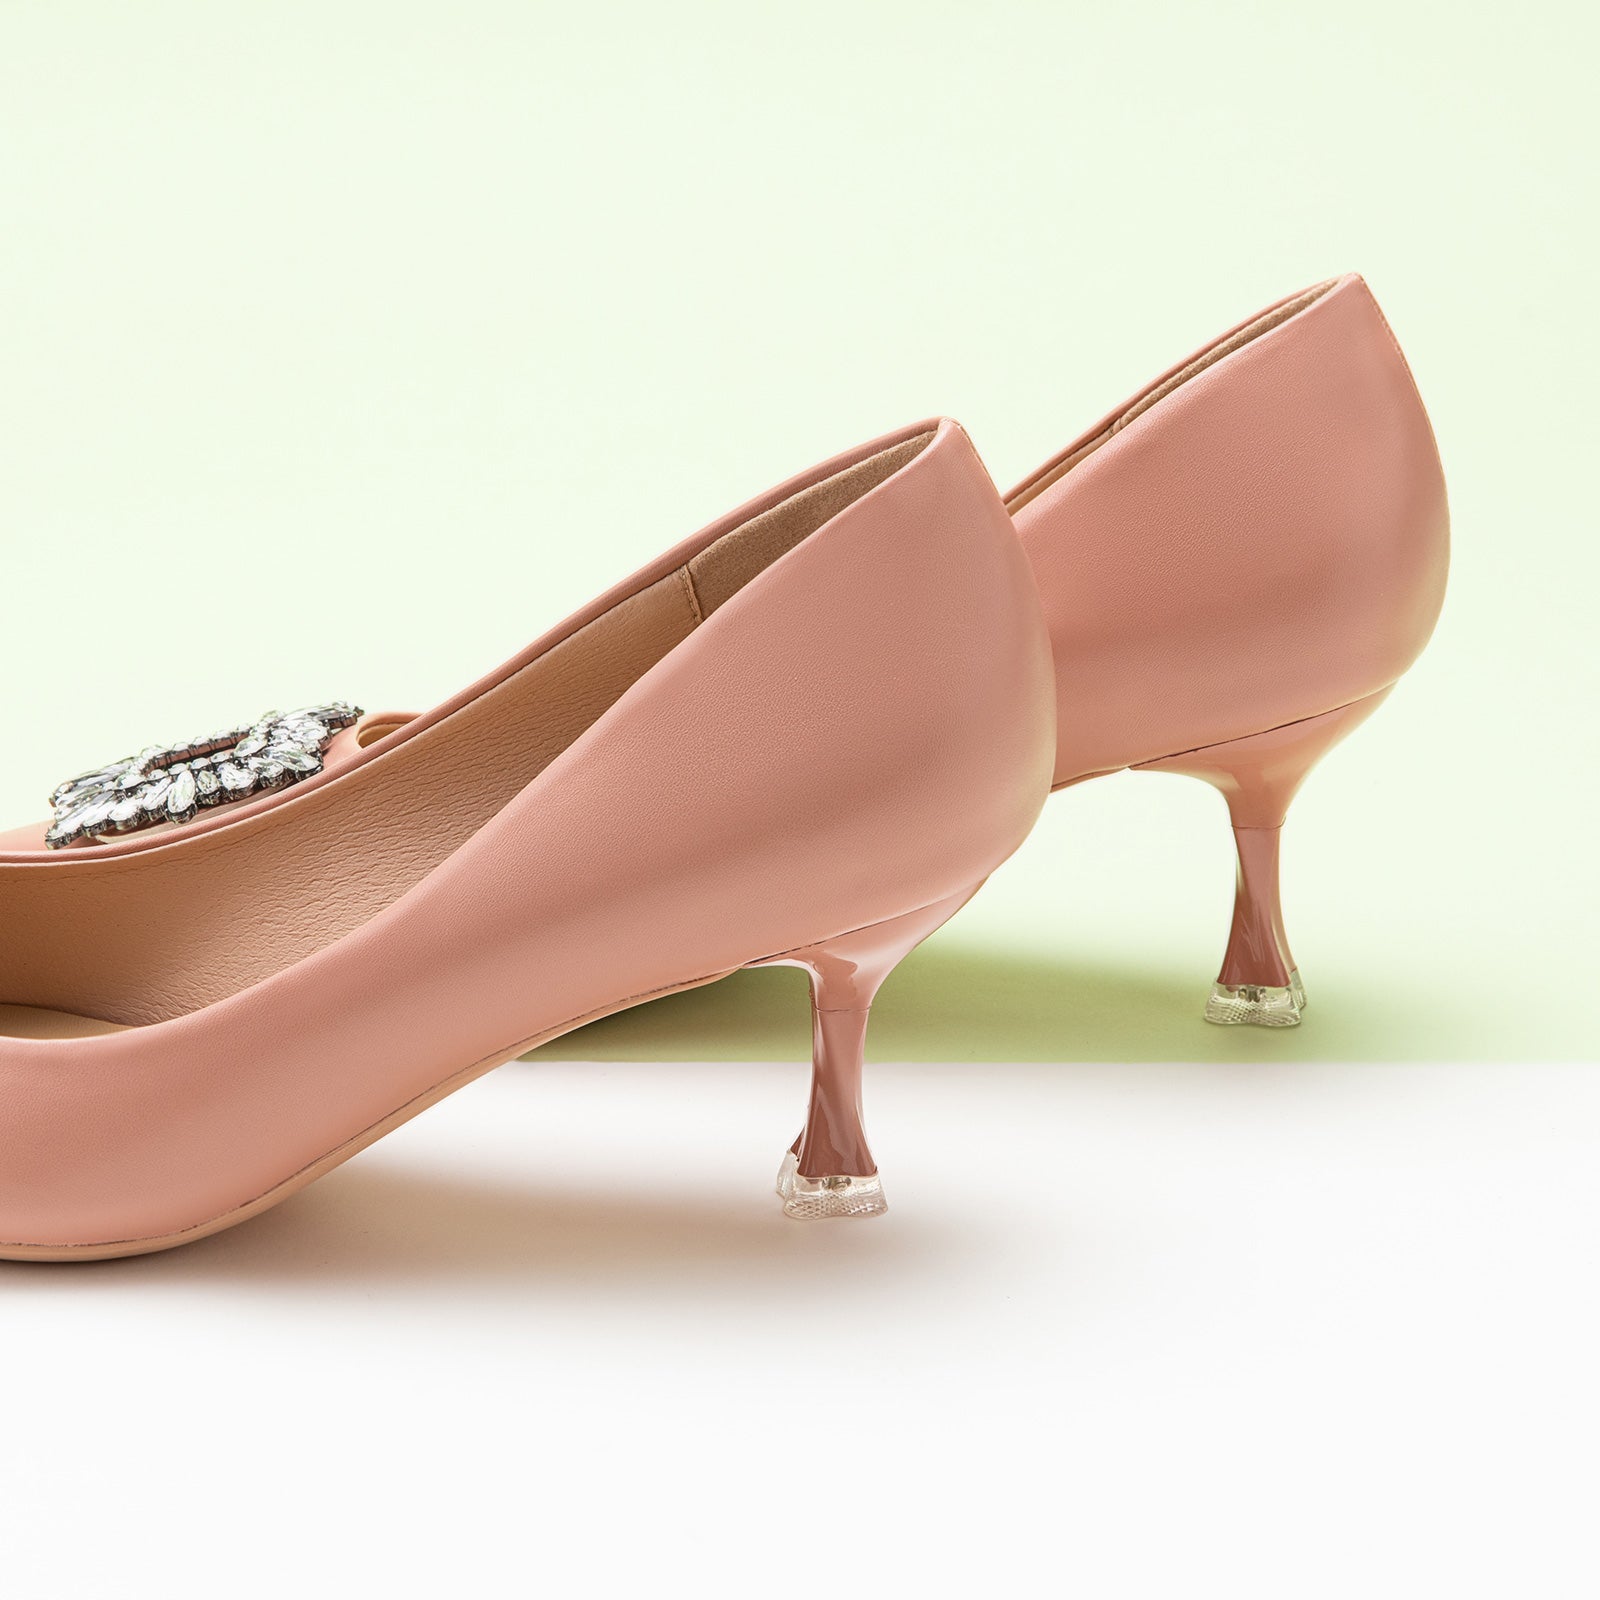 Step into sophistication with these pink pumps featuring crystal embellishments and a stylish buckle, perfect for a polished and refined look.